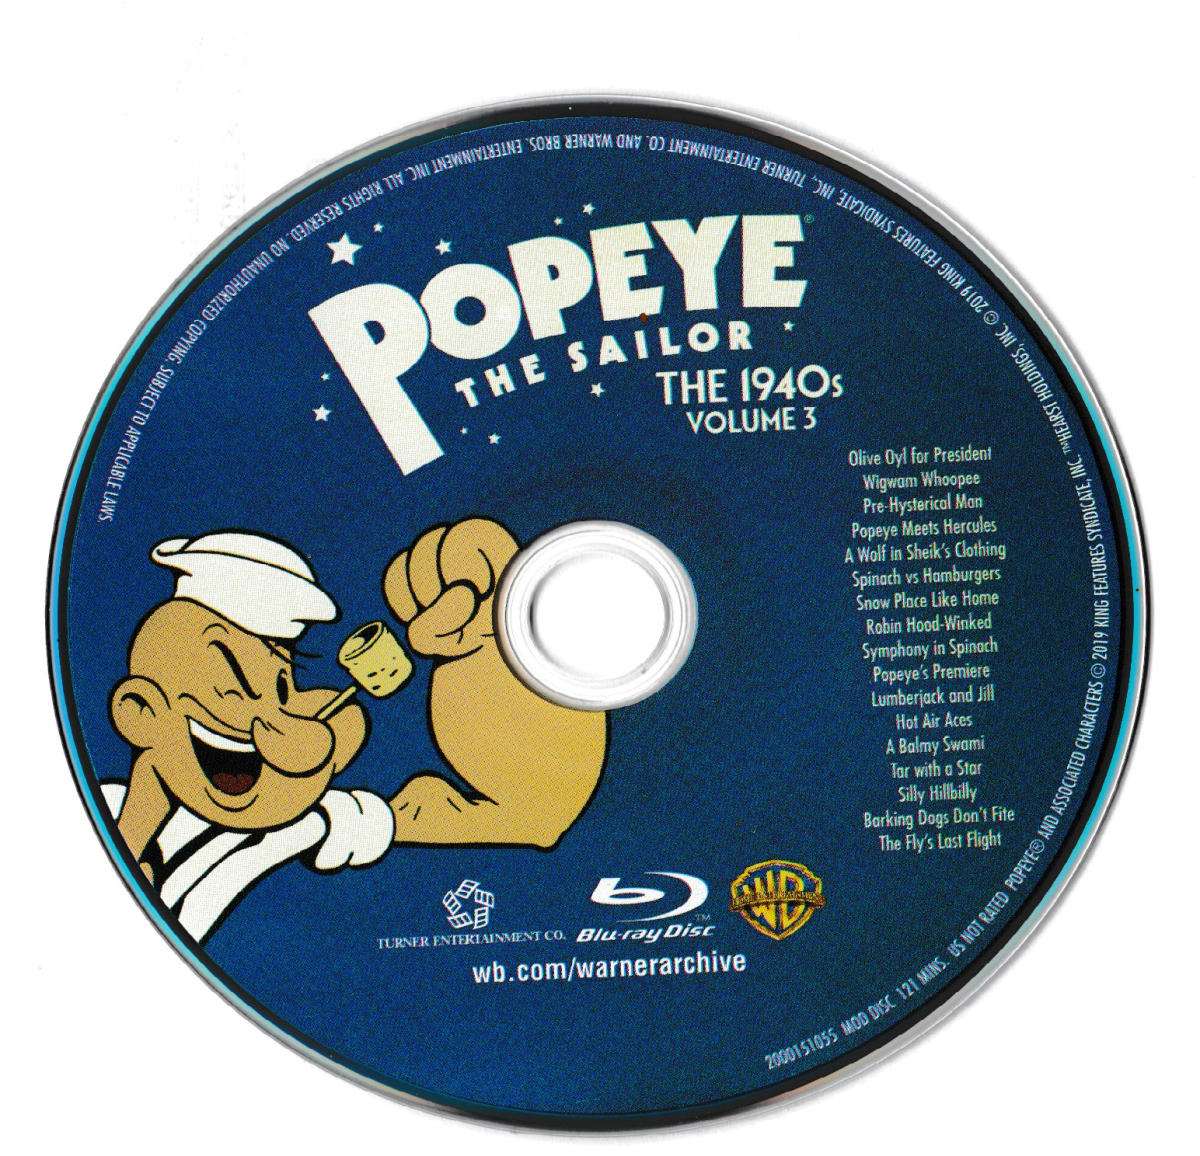 popeye-the-sailor-the-1940s-volume-3-blu-ray-review